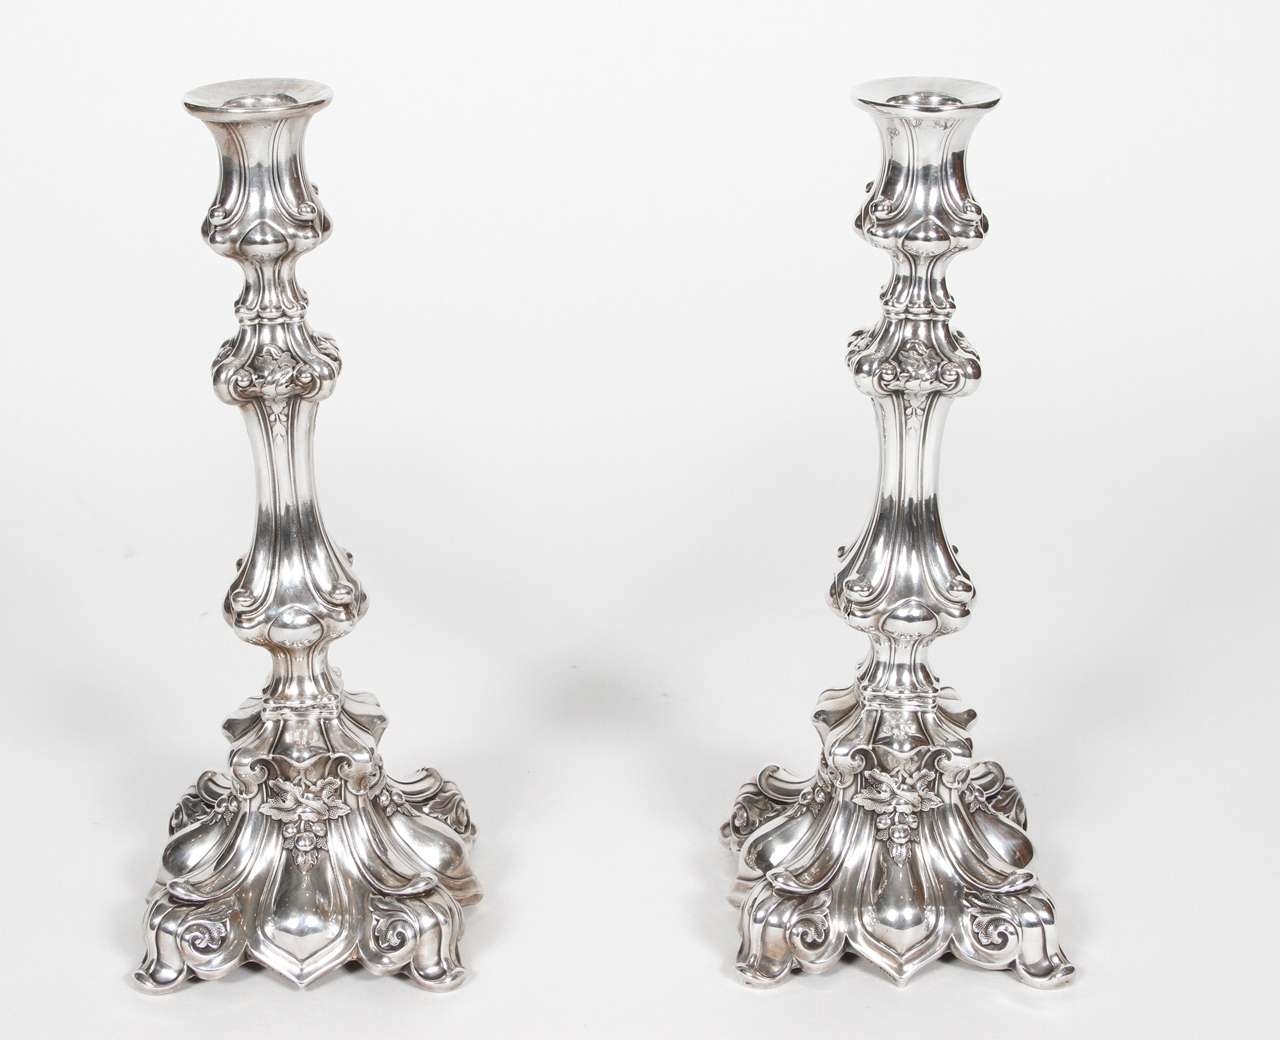 Pair of antique silver plate candlesticks from the early 1900s.